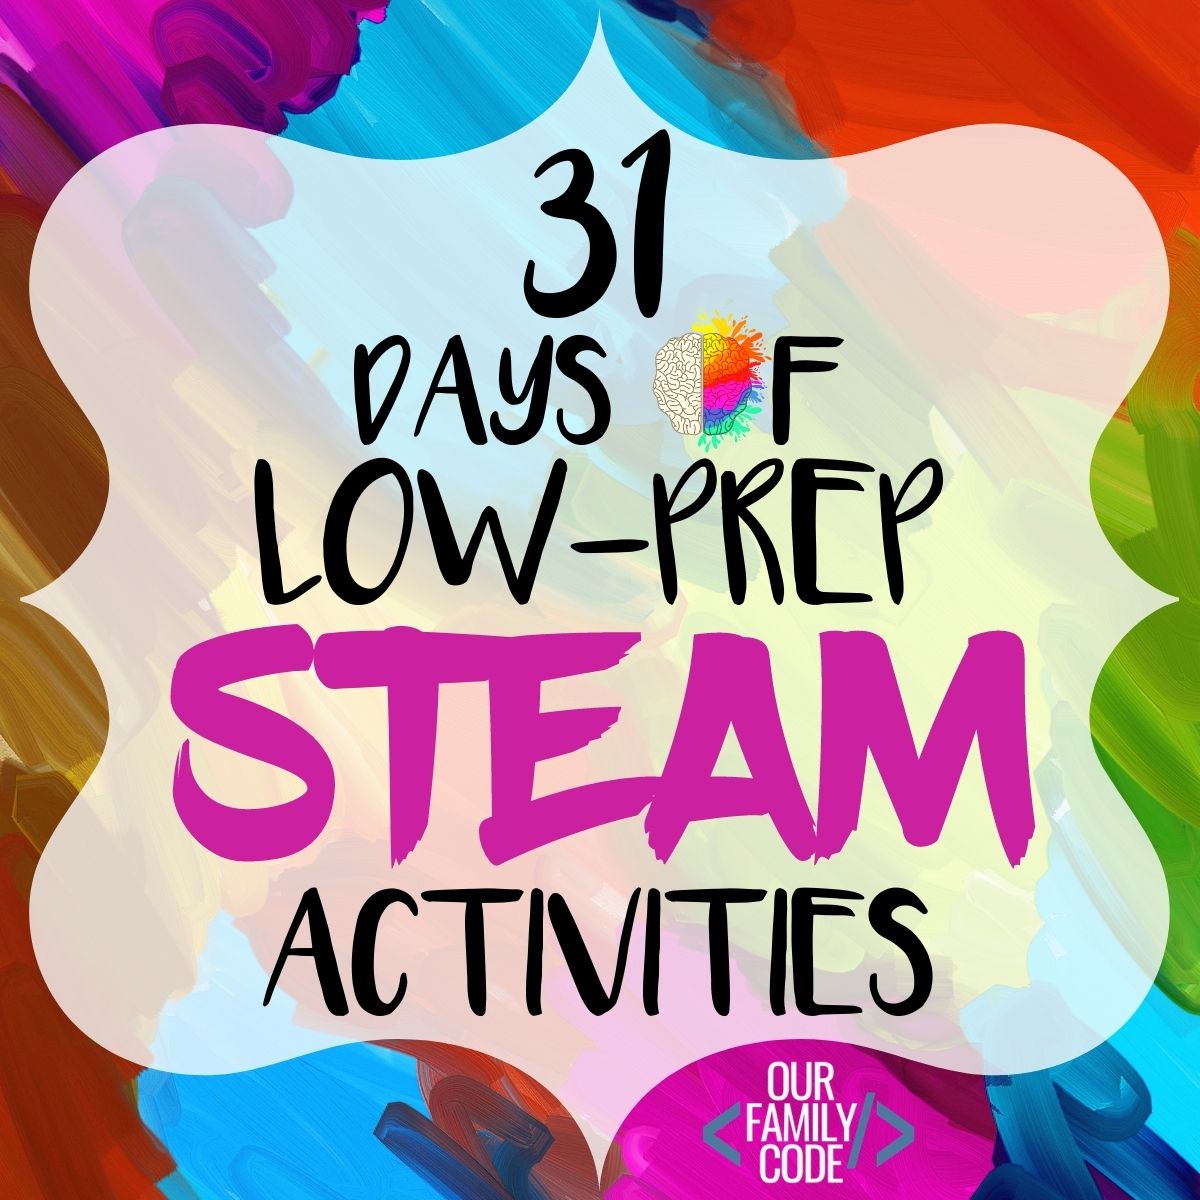 Steam activities for kids фото 21